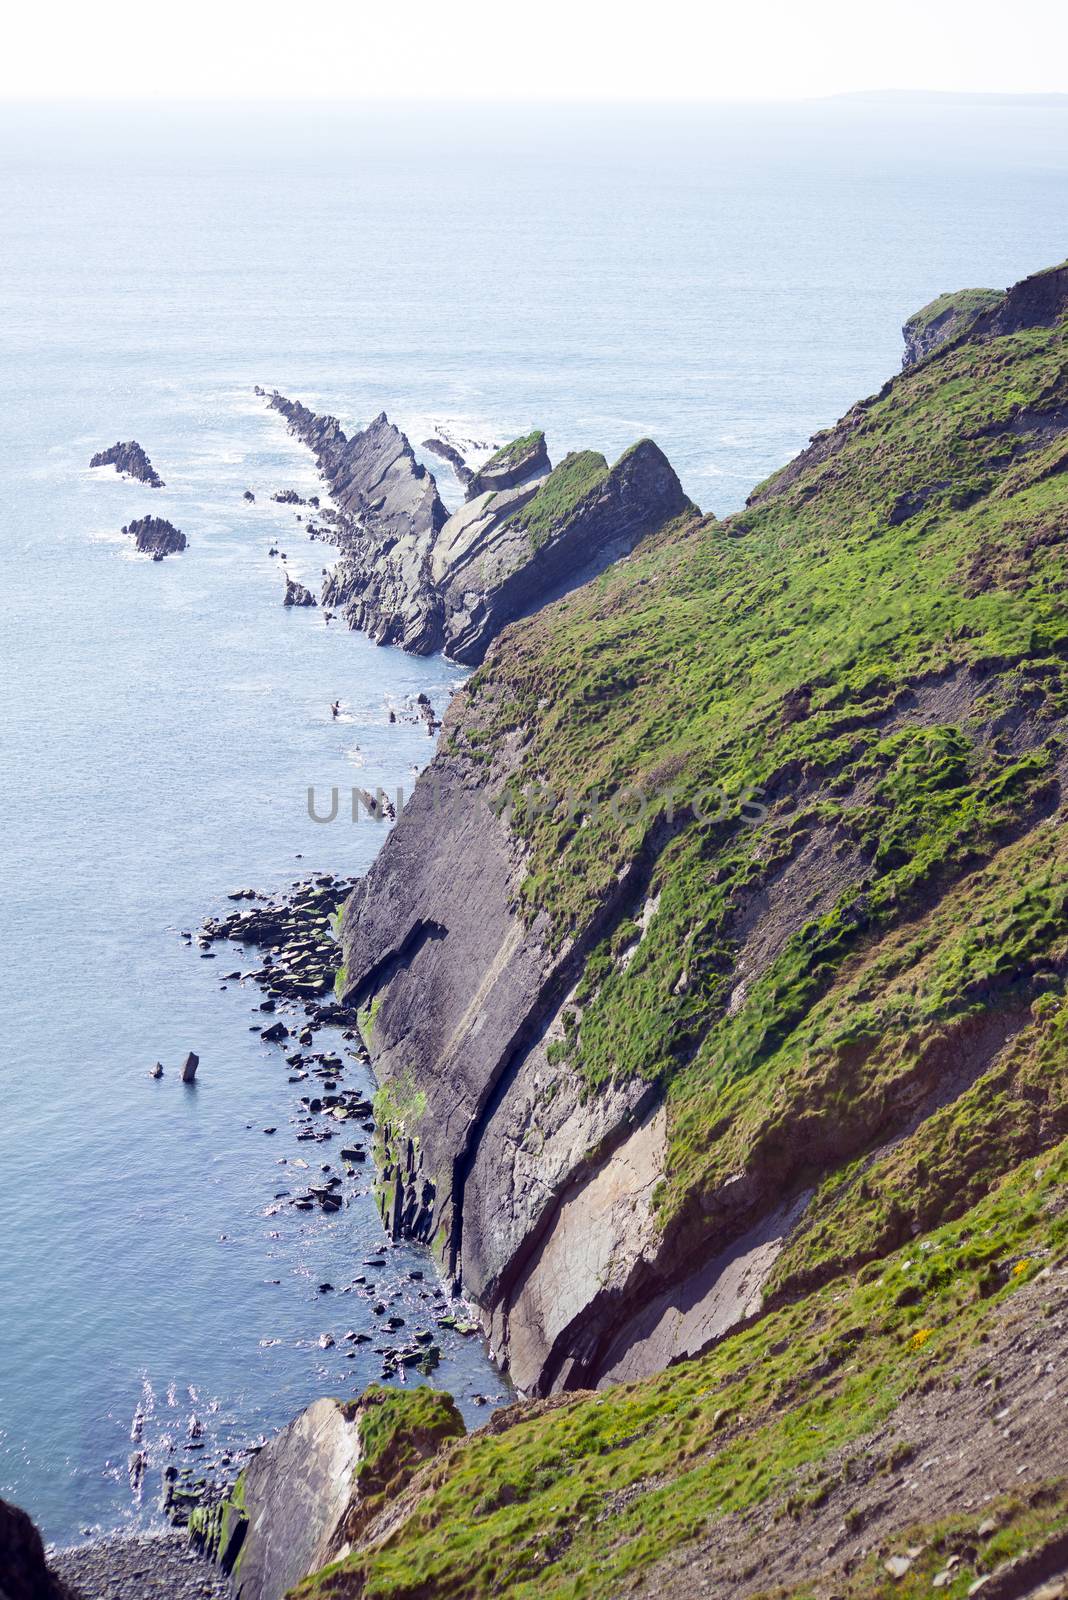 rocky jagged coastline and cliffs in county kerry ireland on the wild atlantic way